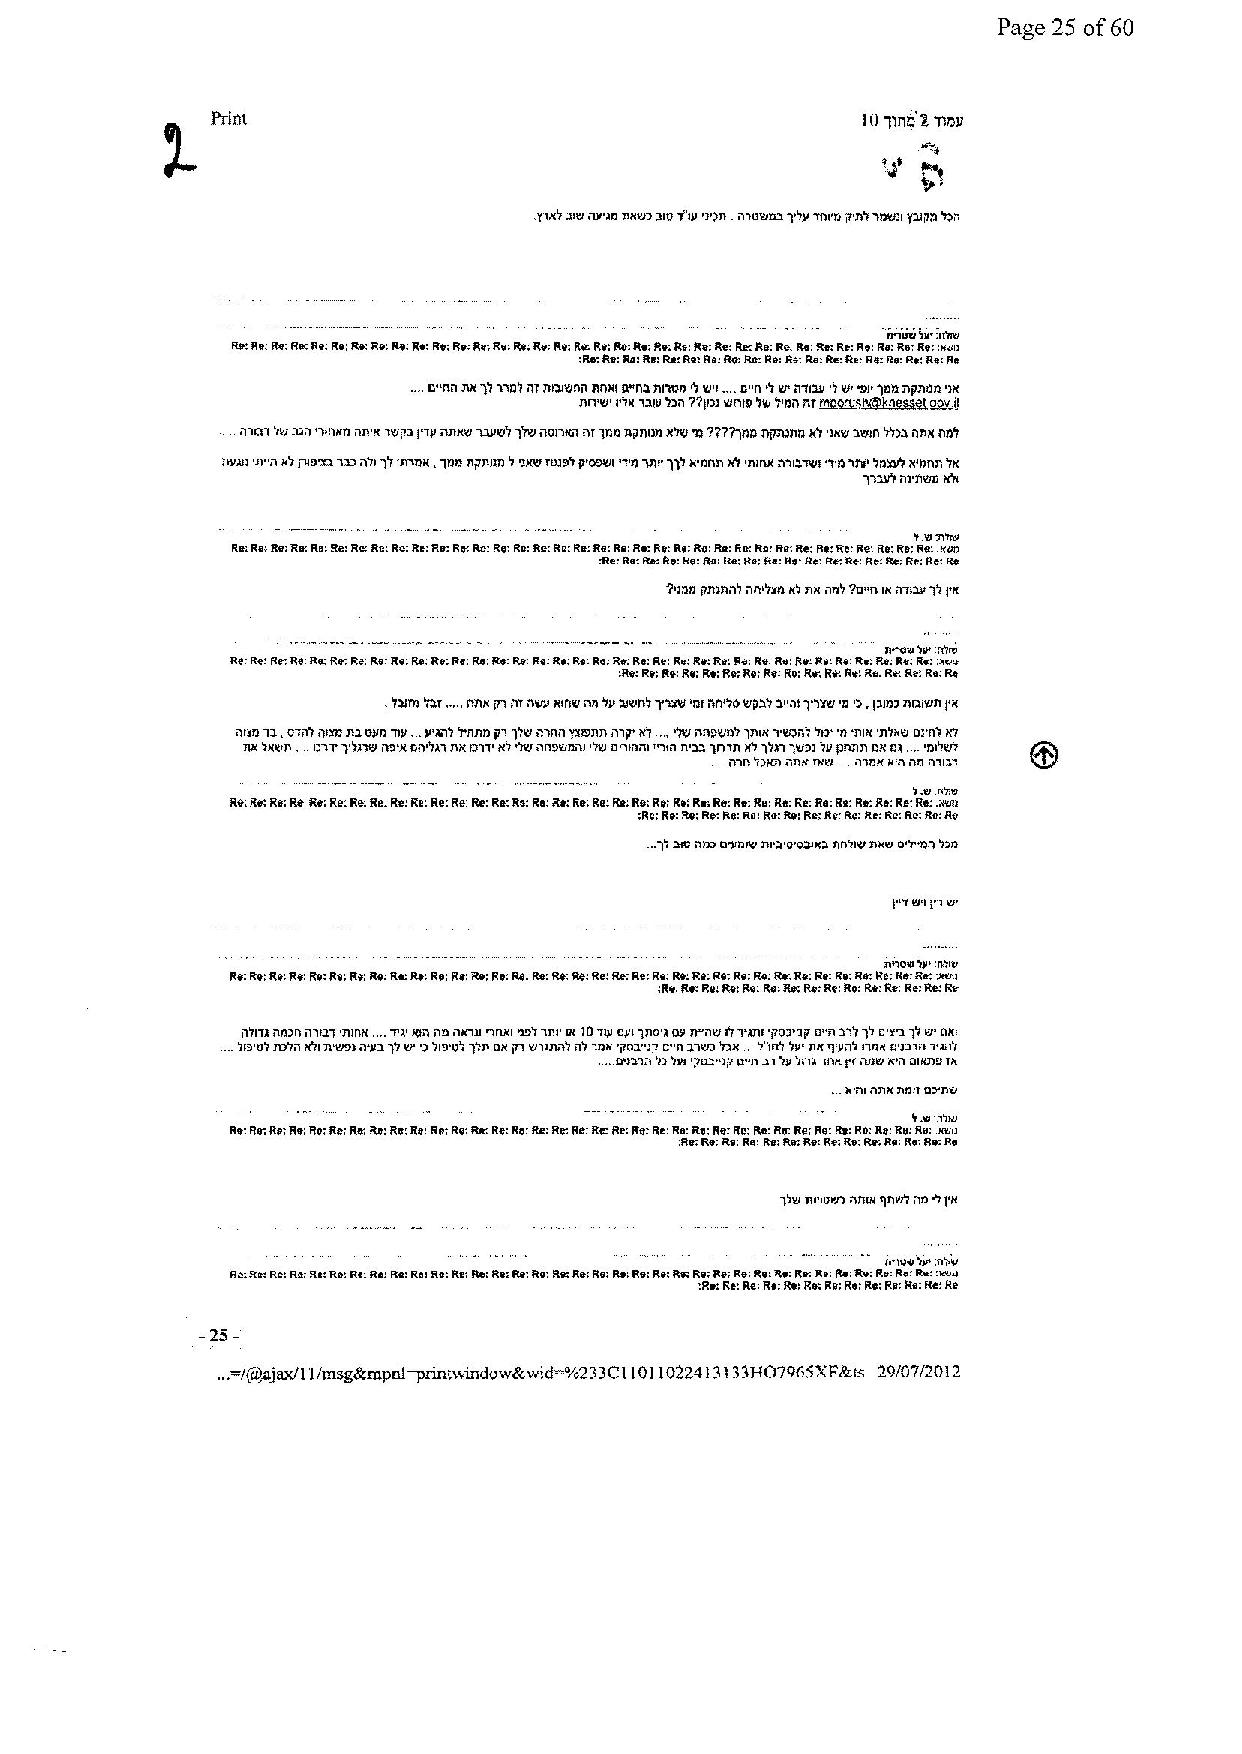 document-page-025